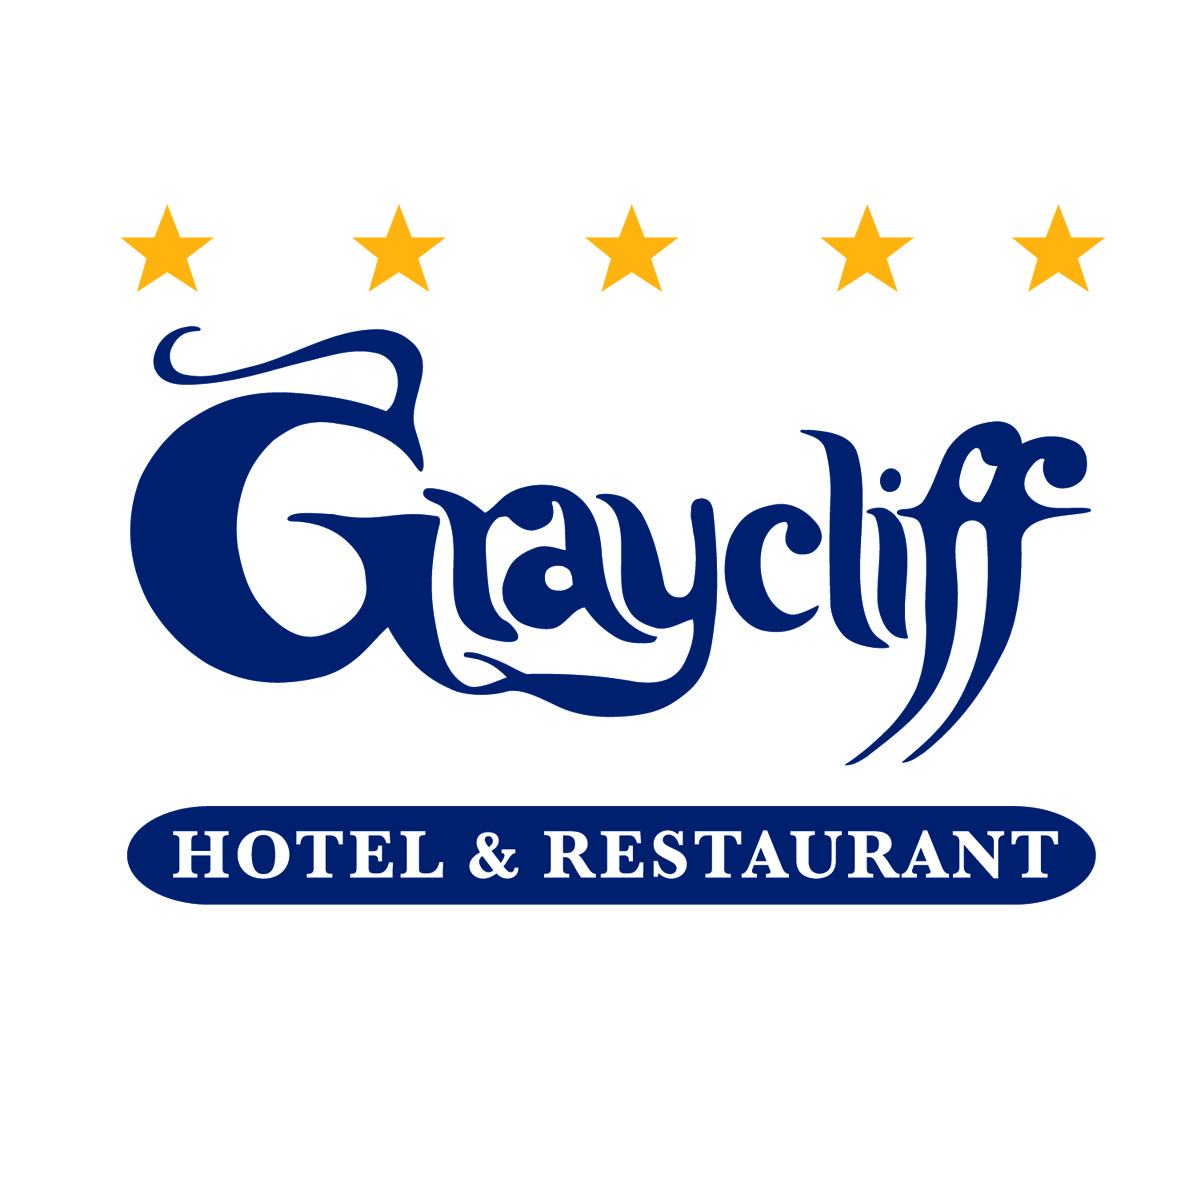 Good taste, great cuisine, superb wines and gracious living come together at Graycliff Hotel & Restaurant, the AAA Four-Diamond private enclave in the heart of Nassau, The Bahamas. For more informatio